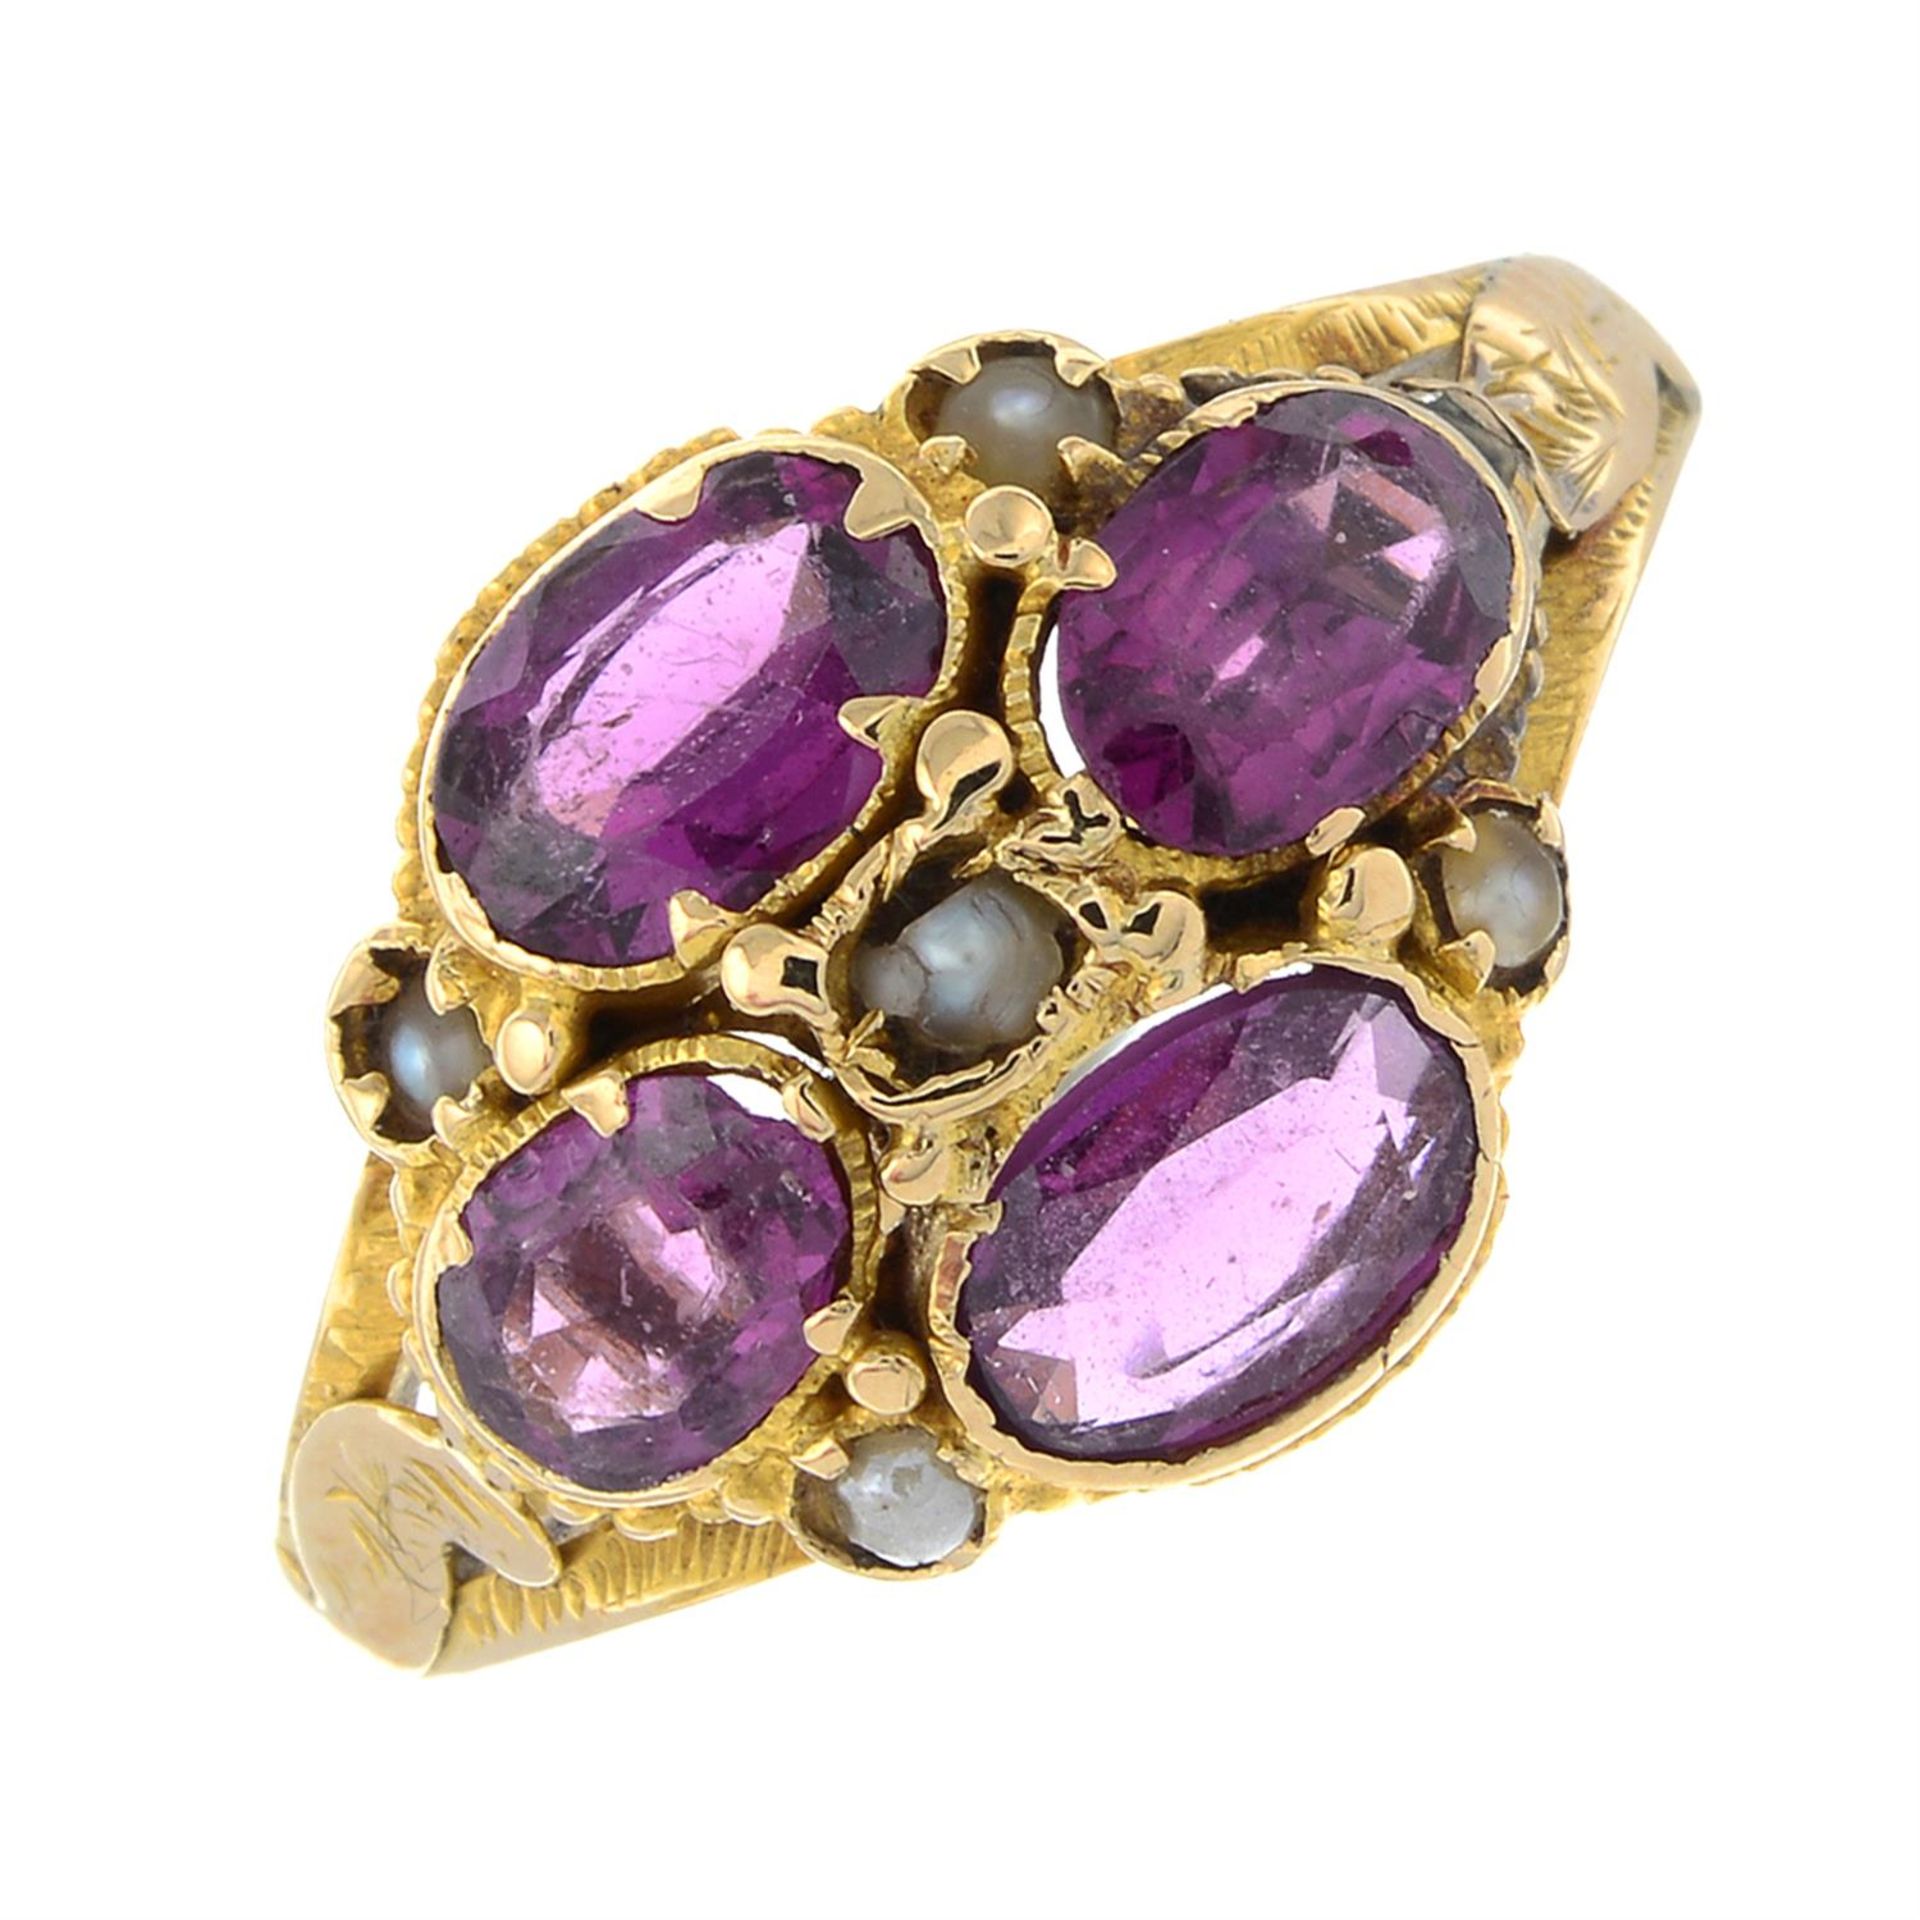 A mid to late 19th century gold garnet and split pearl cluster ring.